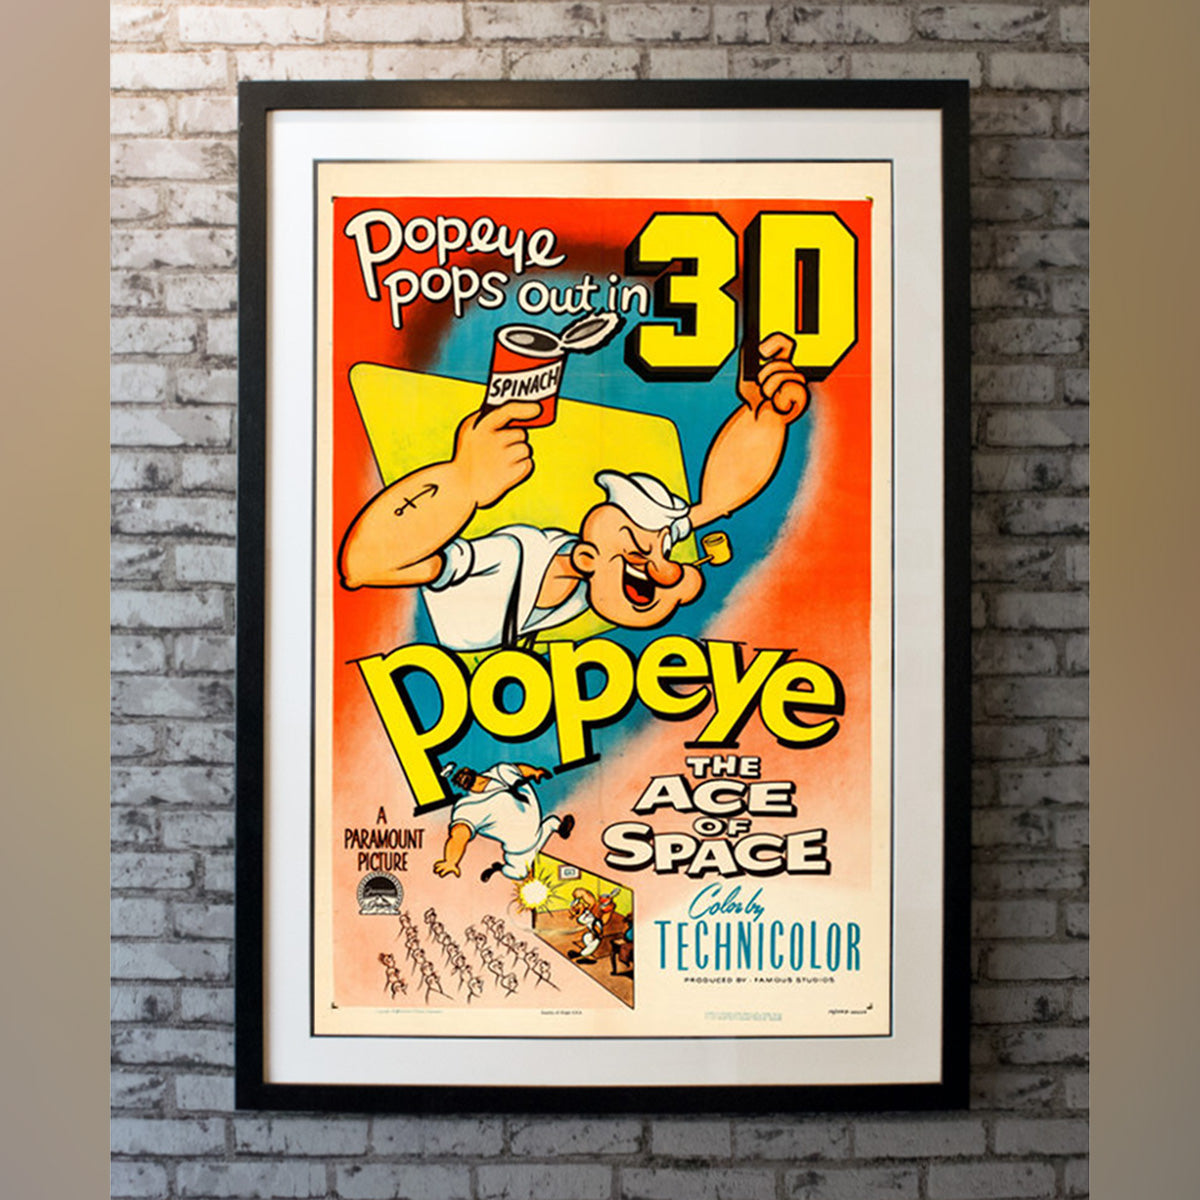 Original Movie Poster of Popeye, The Ace Of Space (1953)